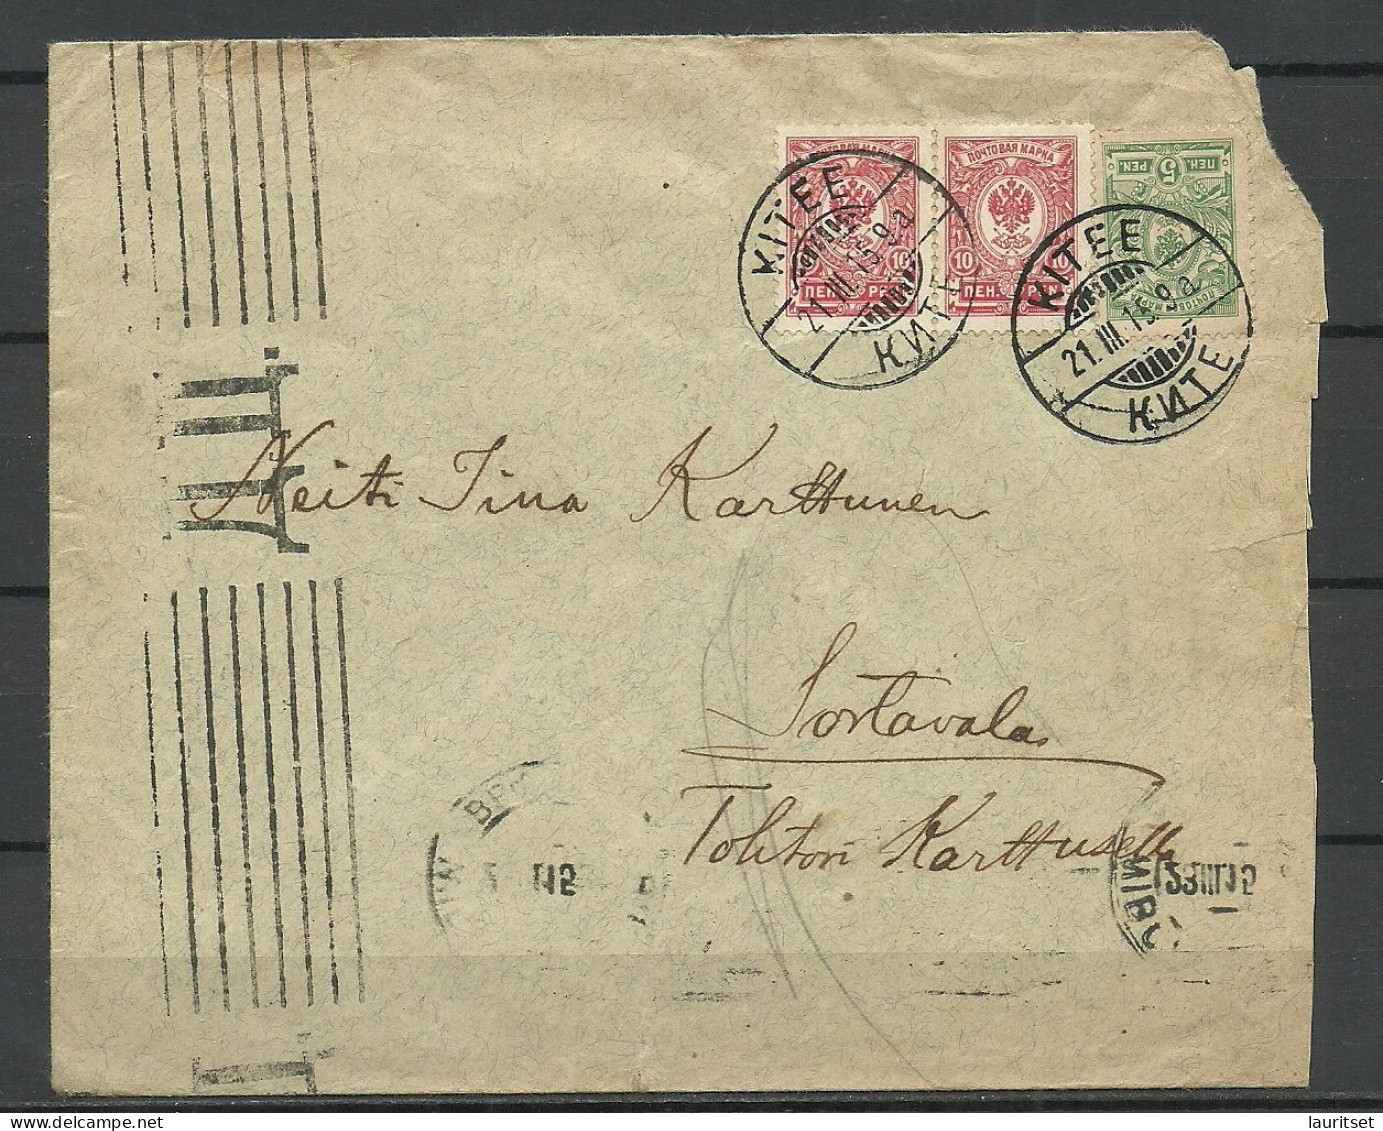 FINLAND O 1915 KITEE Domestic Cover Sent To SORTAVALA Imperial Russian Censor Marking Tsensiert - Covers & Documents